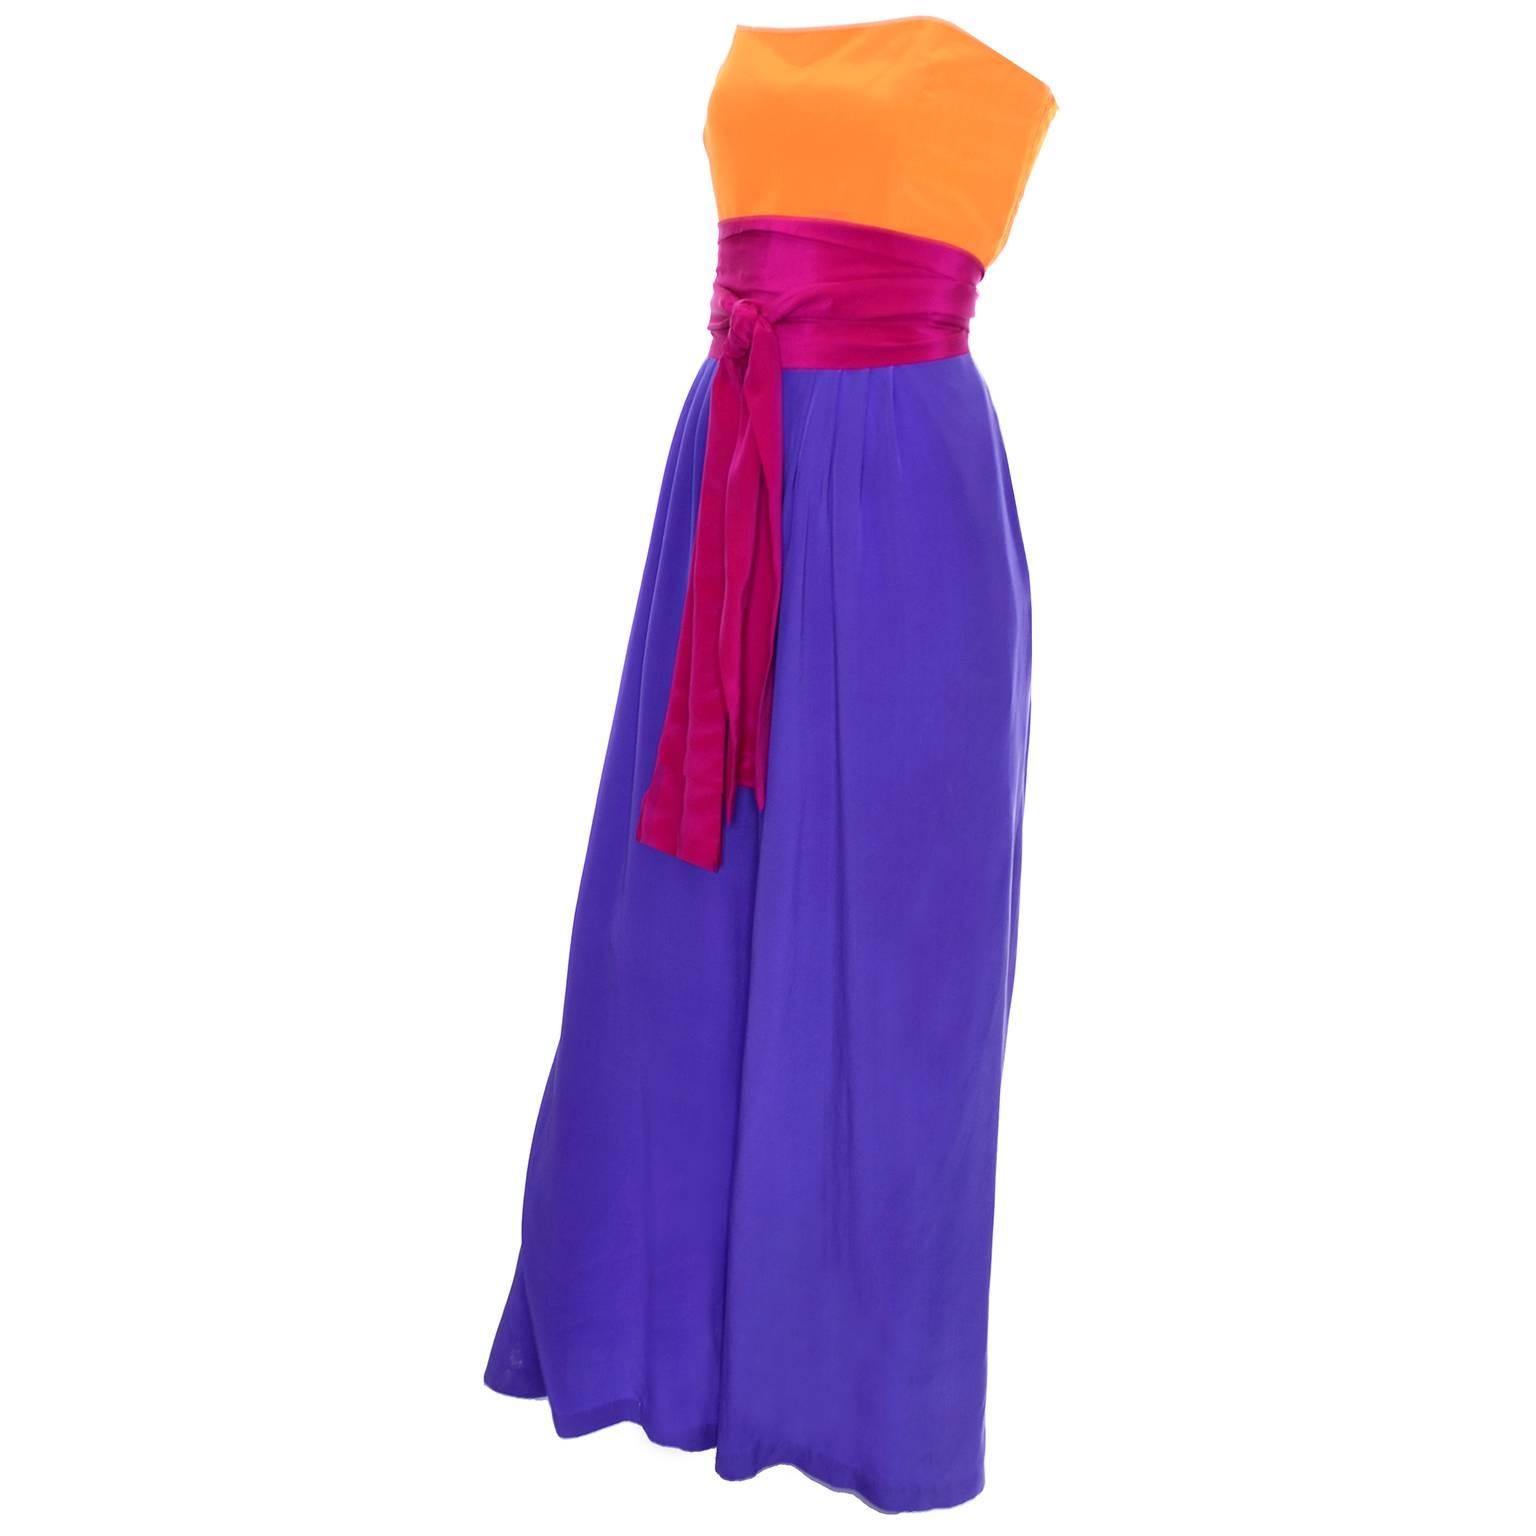 This vintage strapless silk wide leg jumpsuit was designed by Linda Allard for Ellen Tracy and made in Hong Kong in the 1980's. This amazing outfit is in a gorgeous orange and purple color block silk with a deep pink silk sash. This comes with its